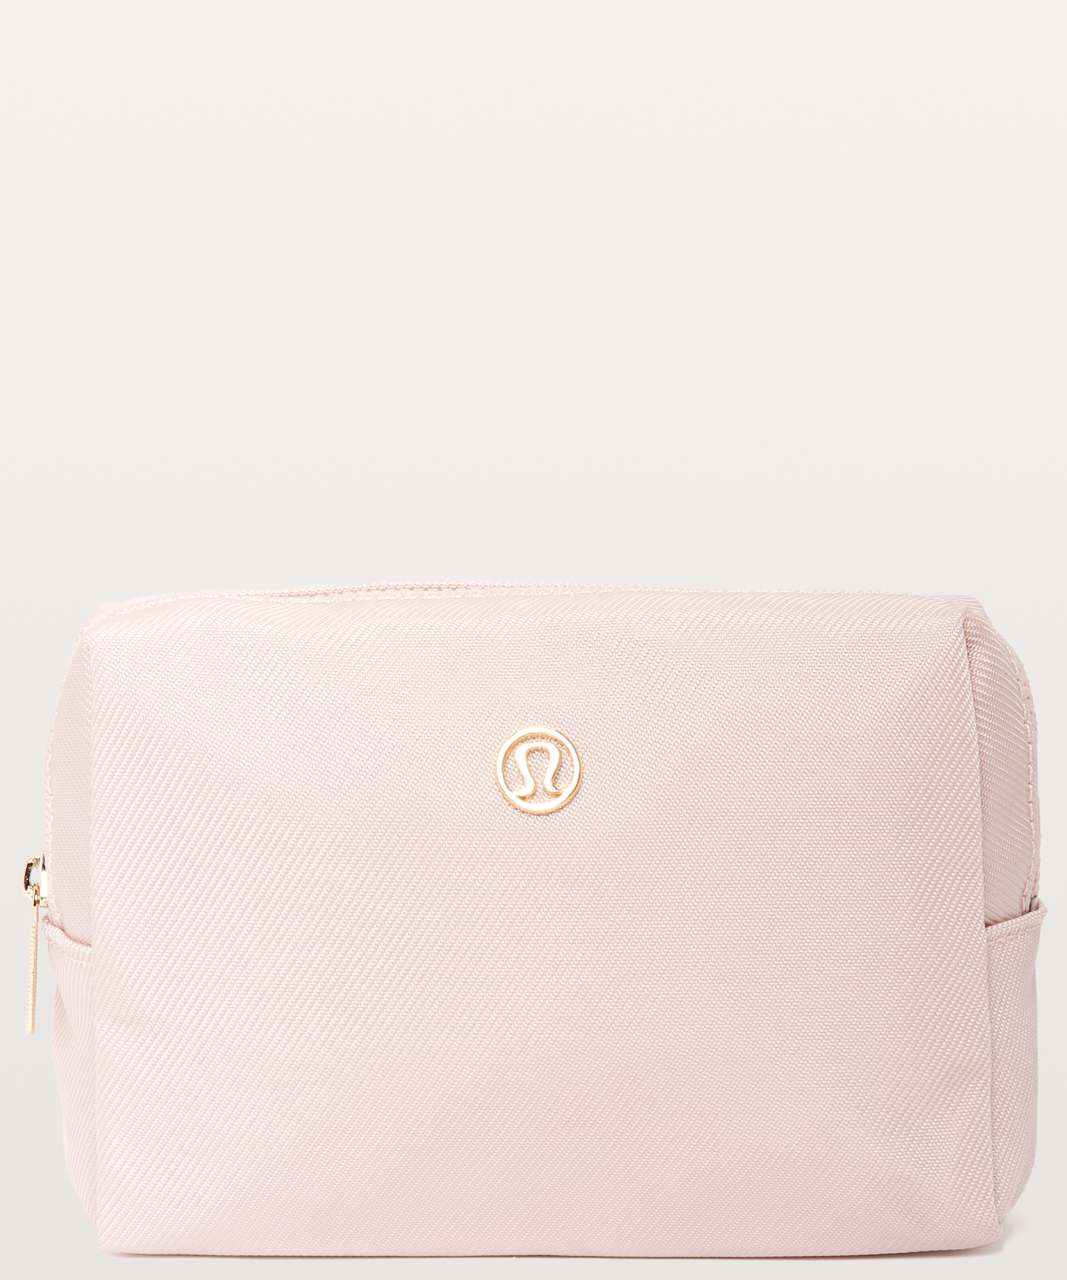 Lululemon All Your Small Things Pouch *Mini 2L - Misty Pink